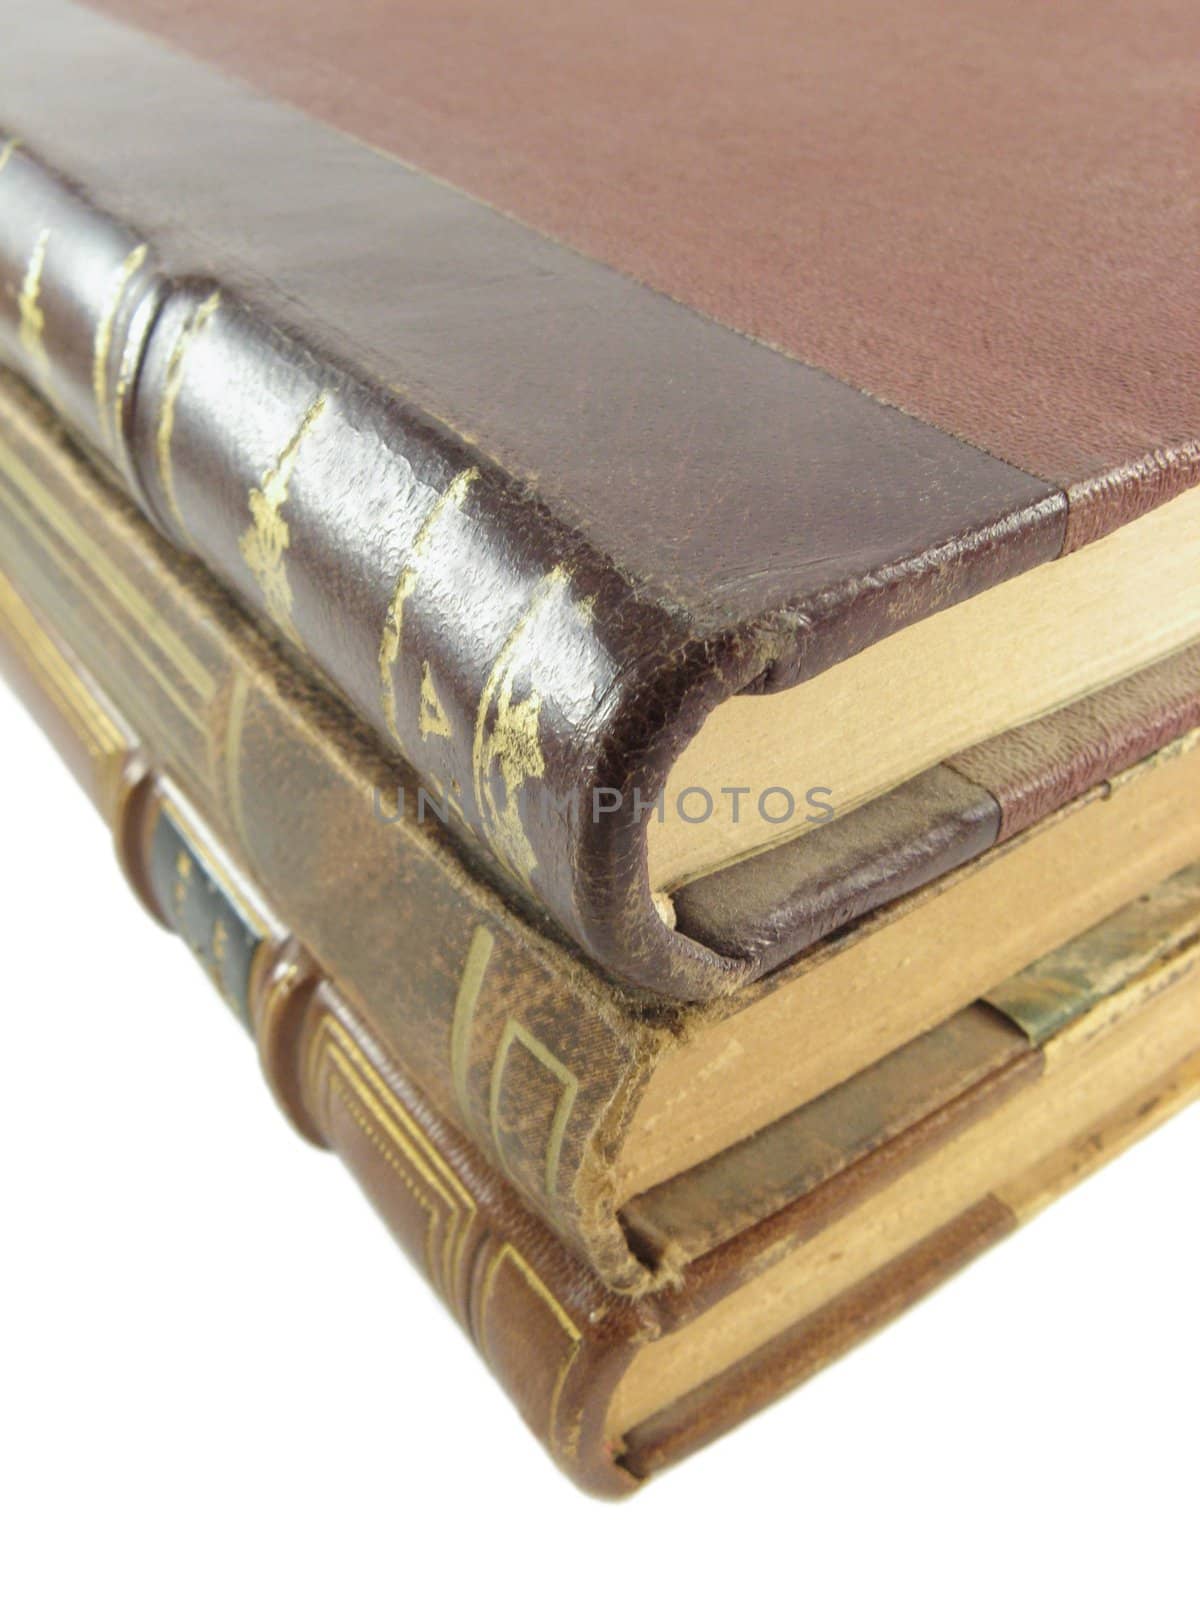 image of some ancient books on a white background